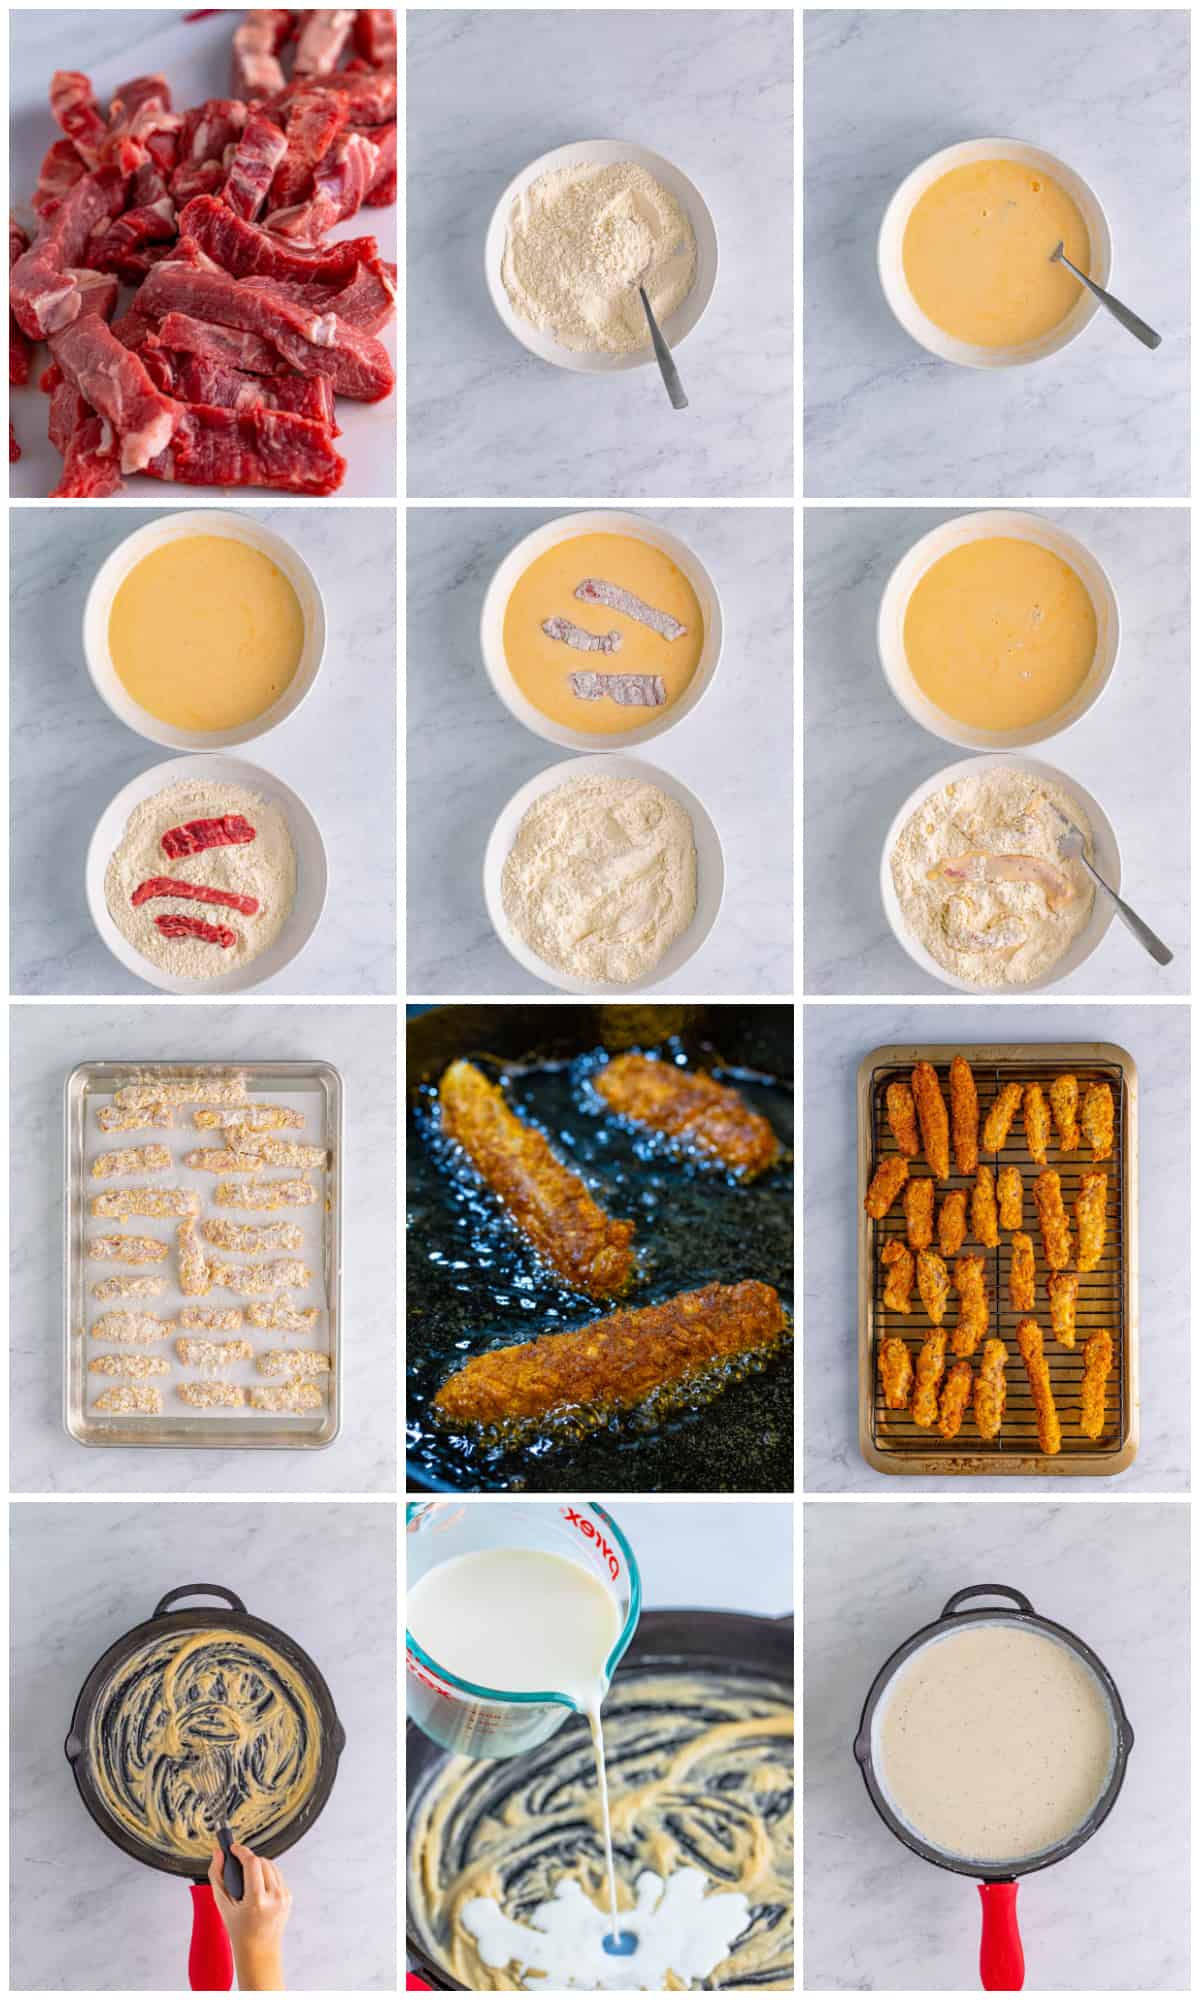 Step by step photos on how to make Steak Fingers.